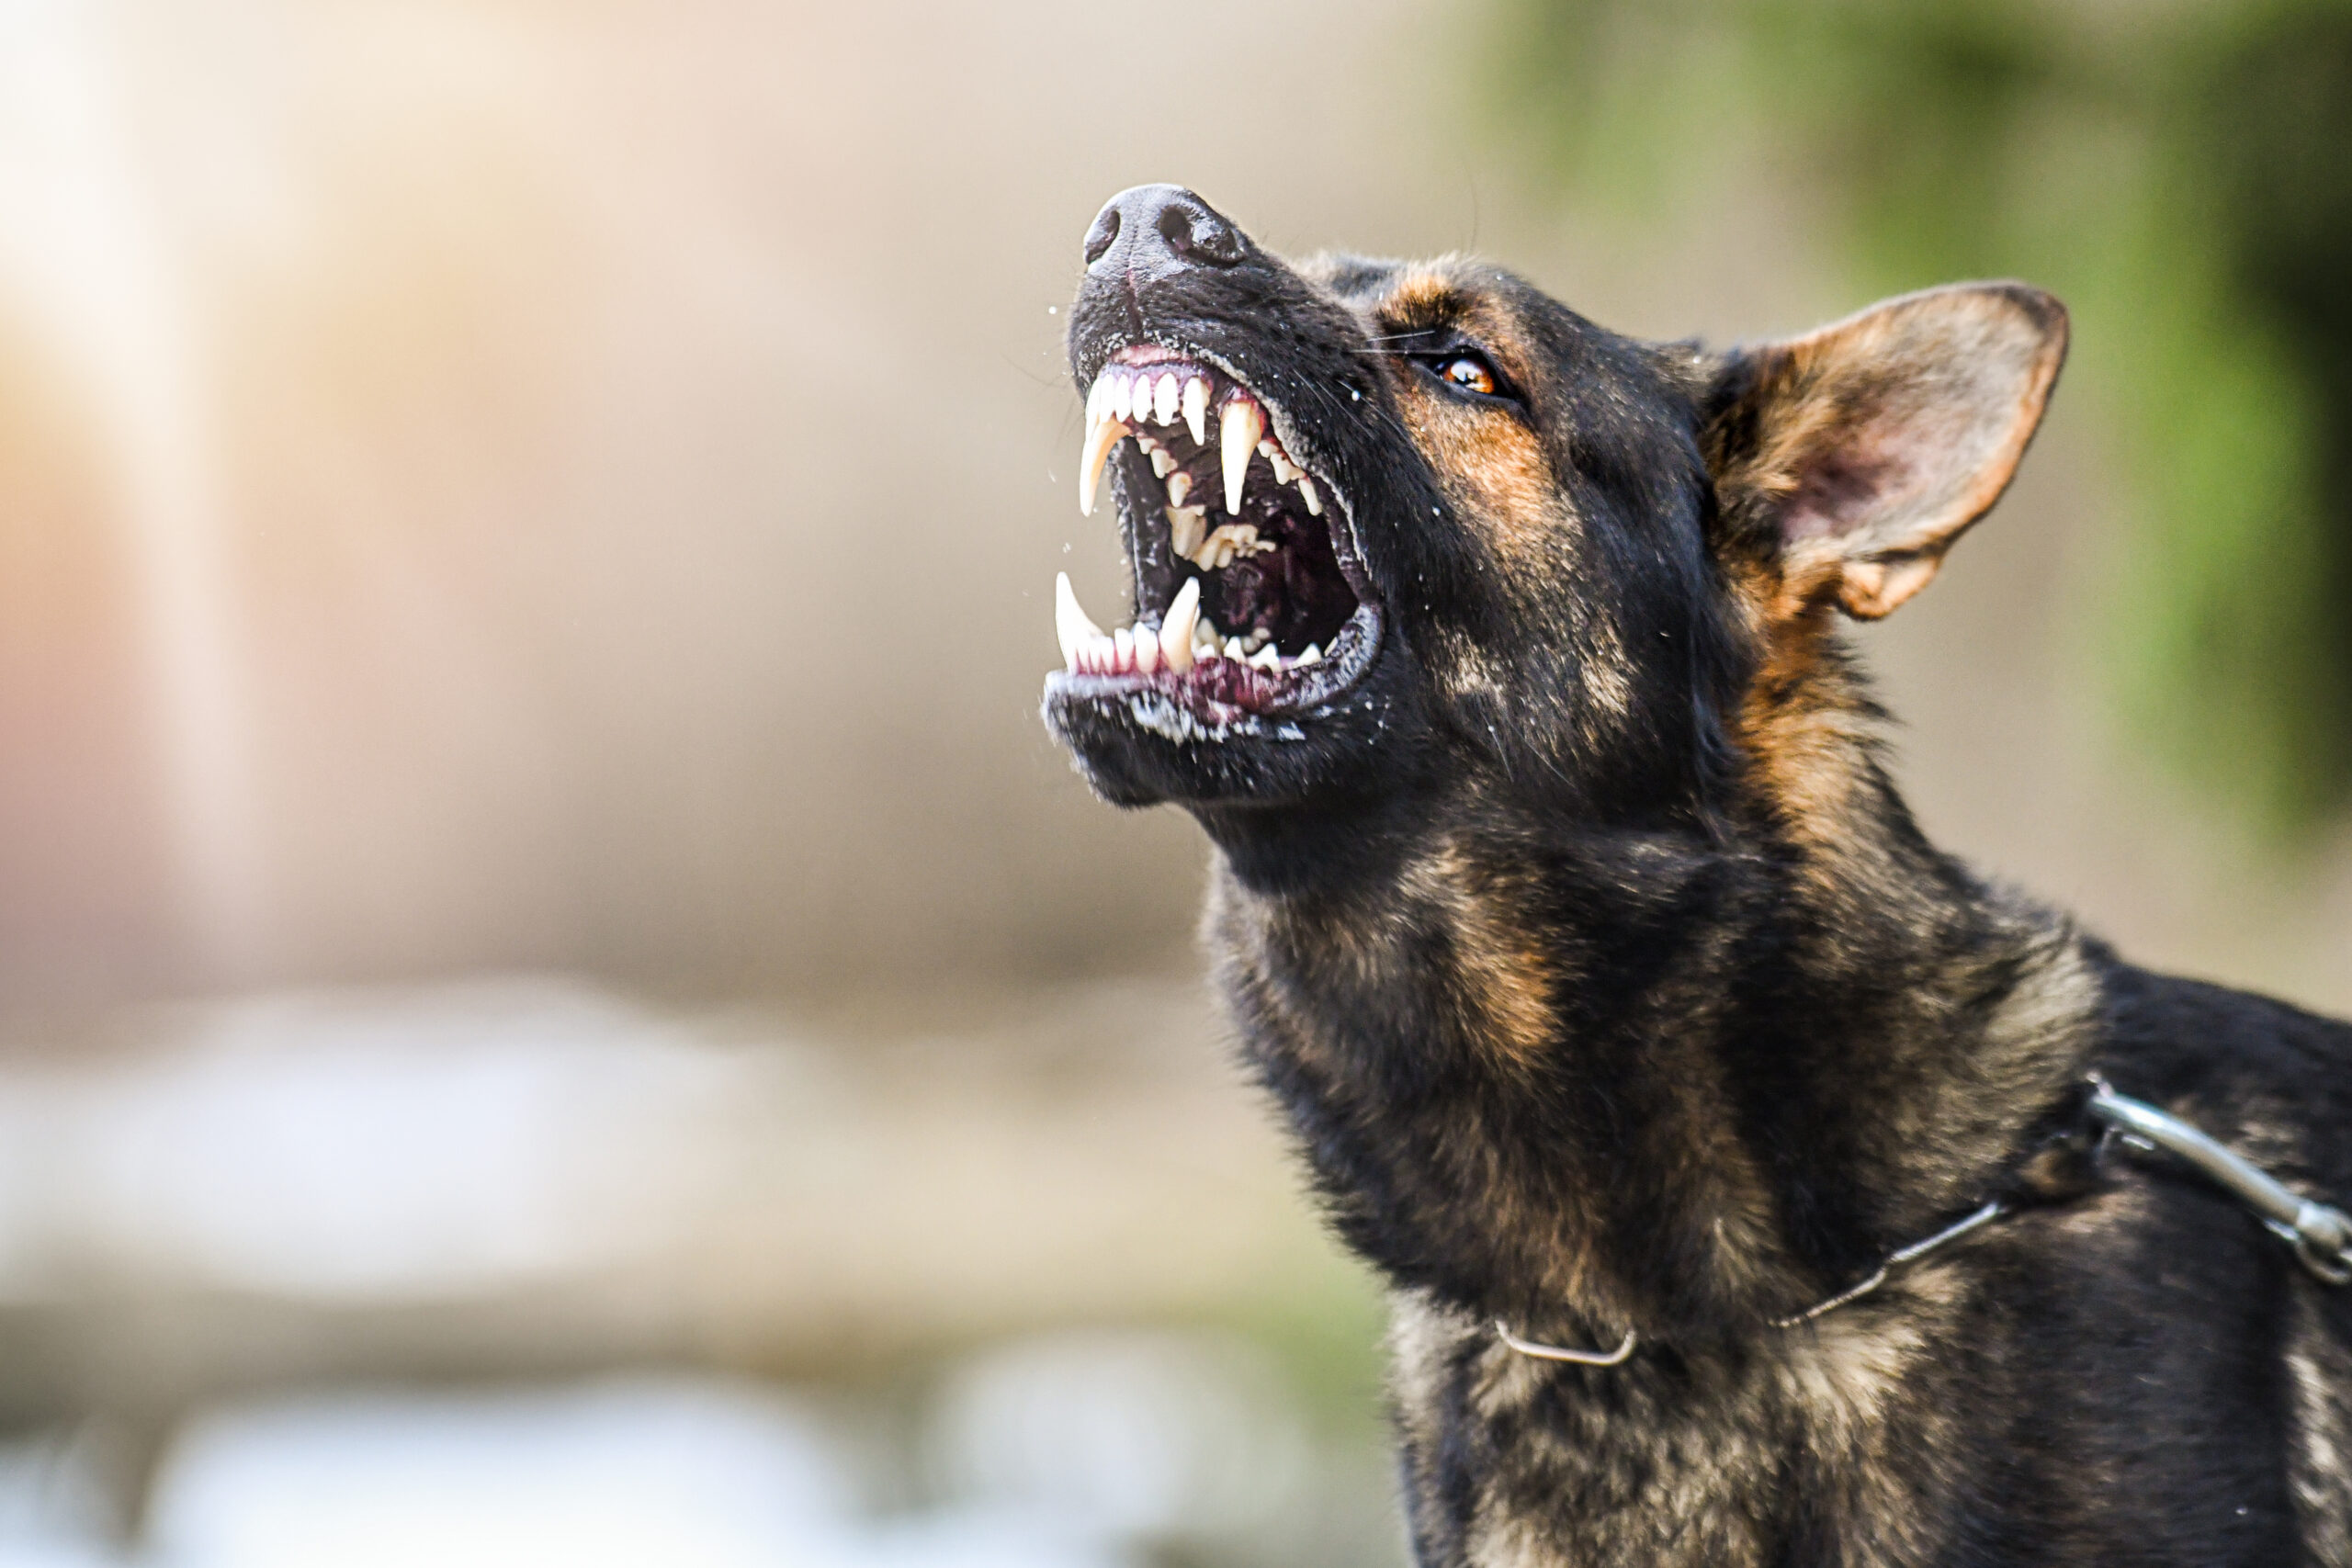 Dog Bite Liability Laws in Washington State